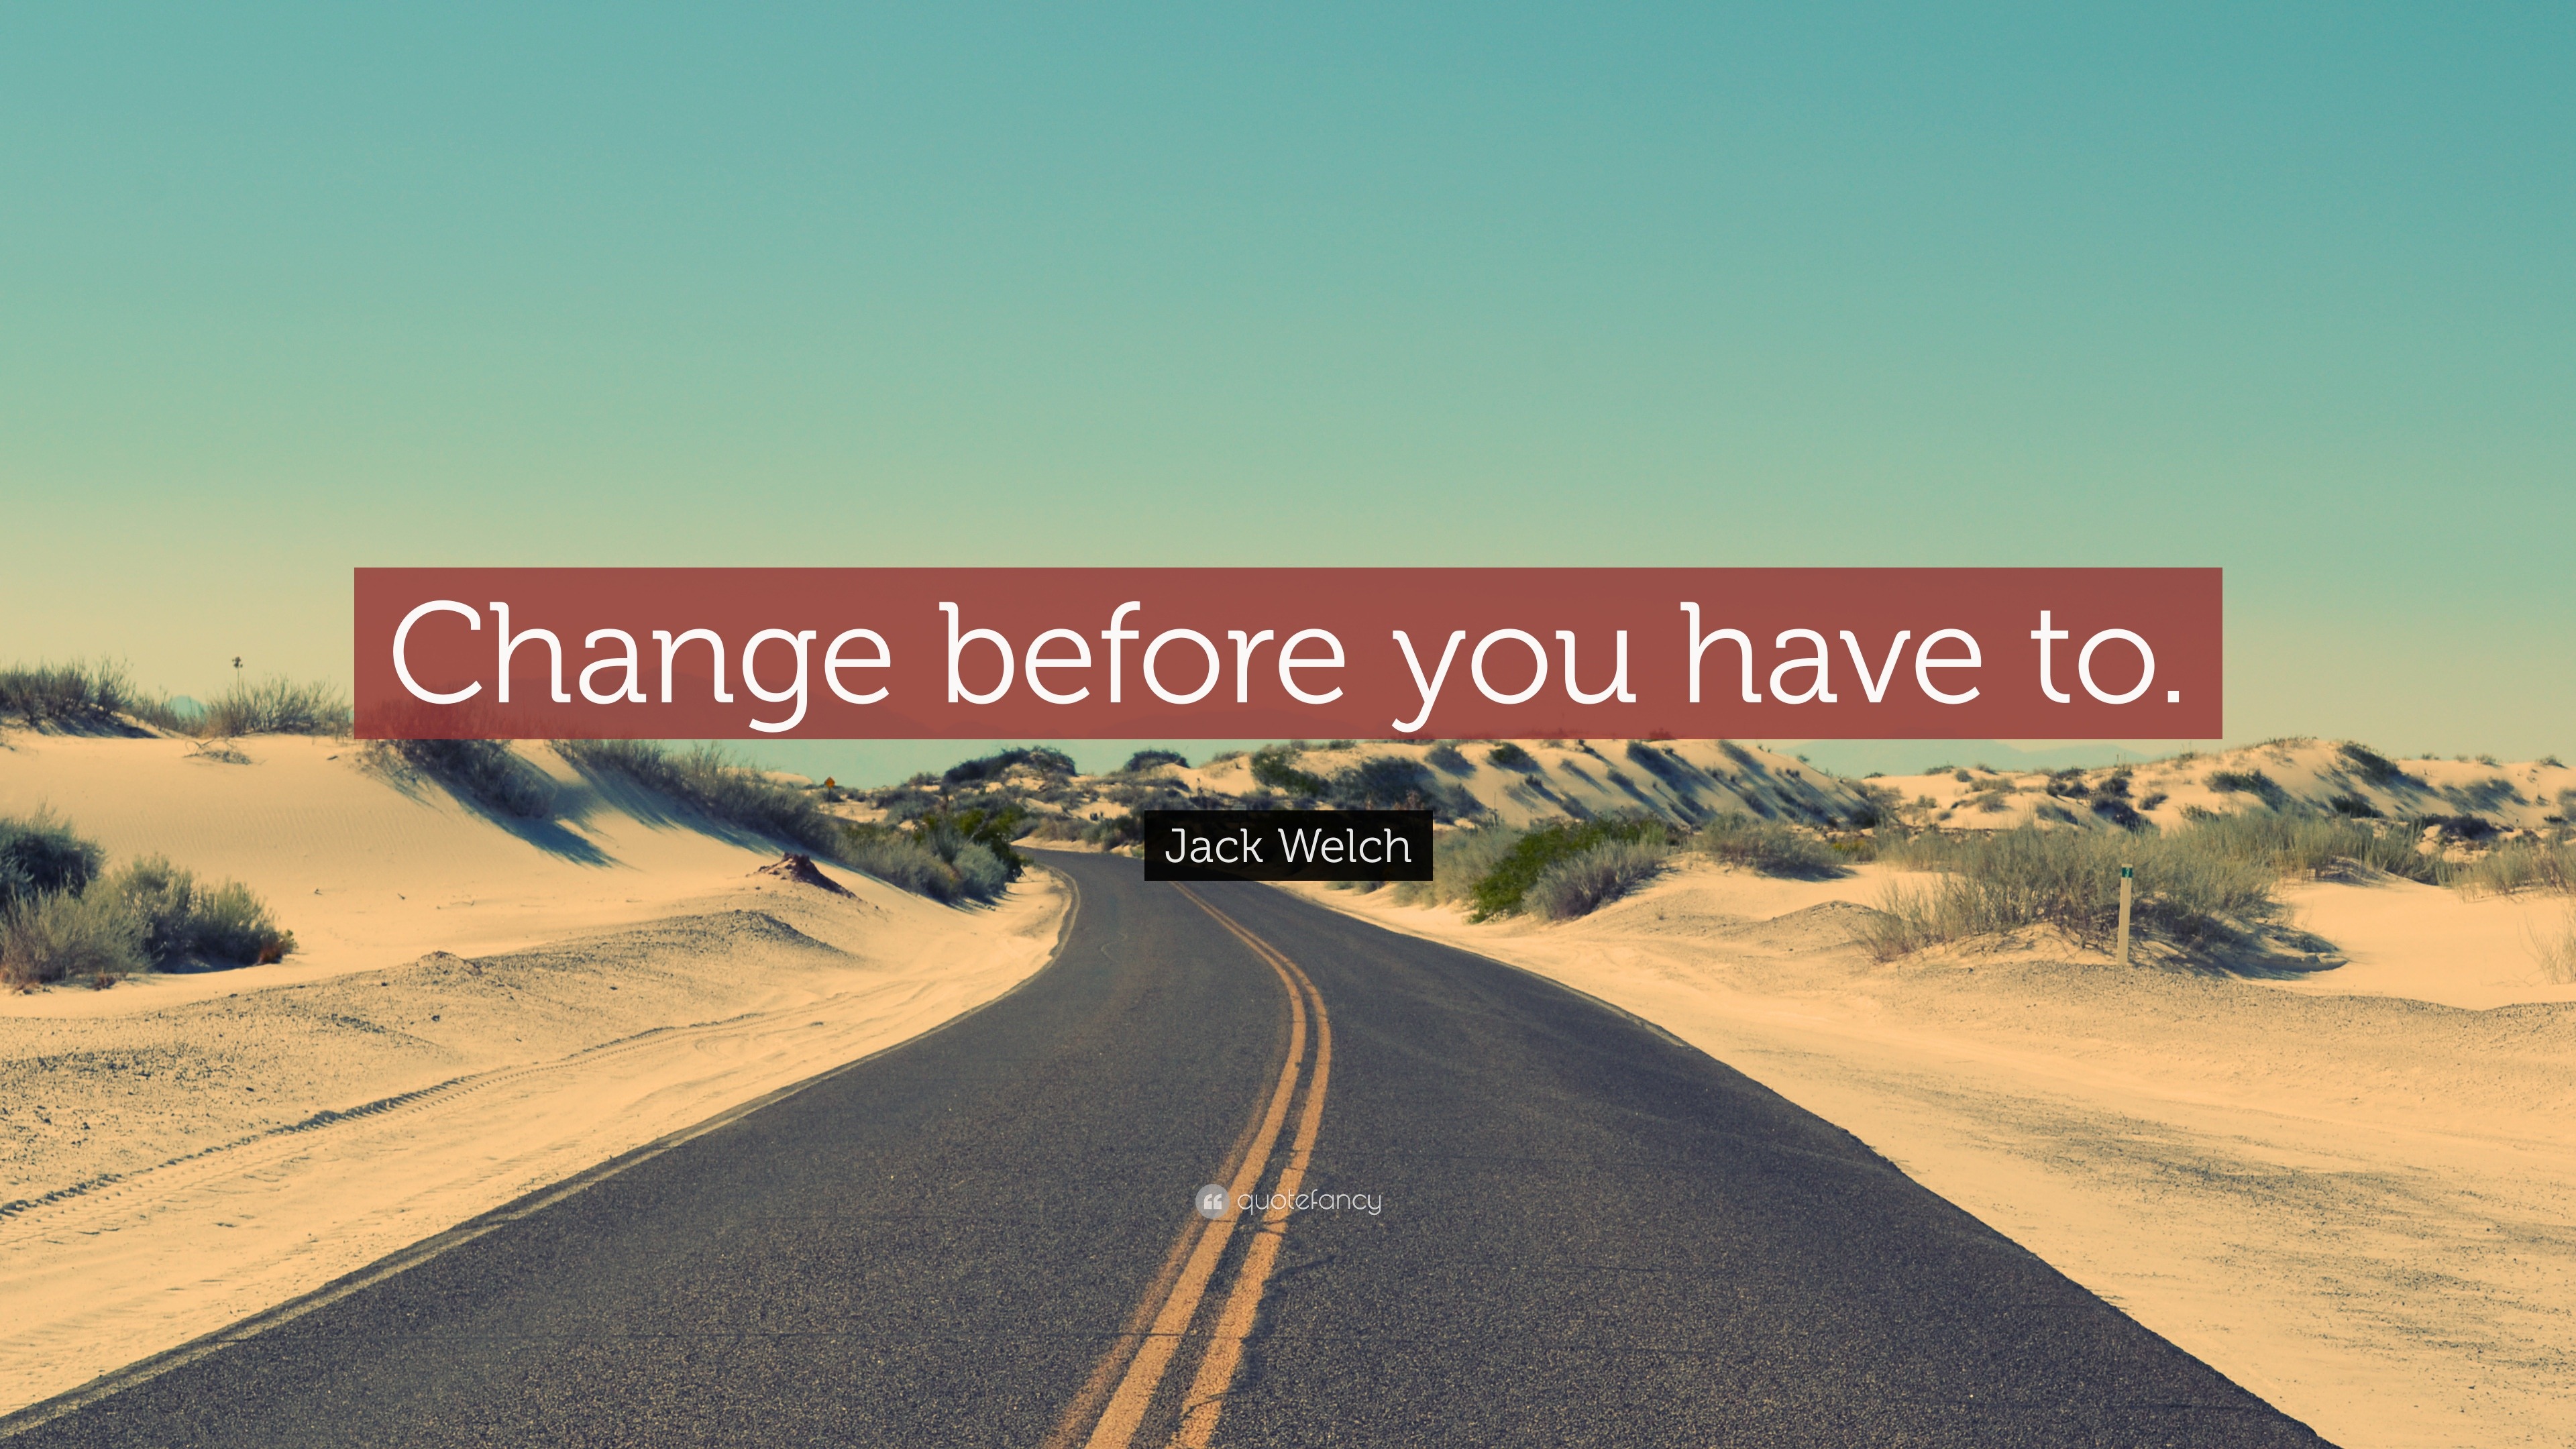 Jack Welch Quote Change Before You Have To 22 Wallpapers Quotefancy